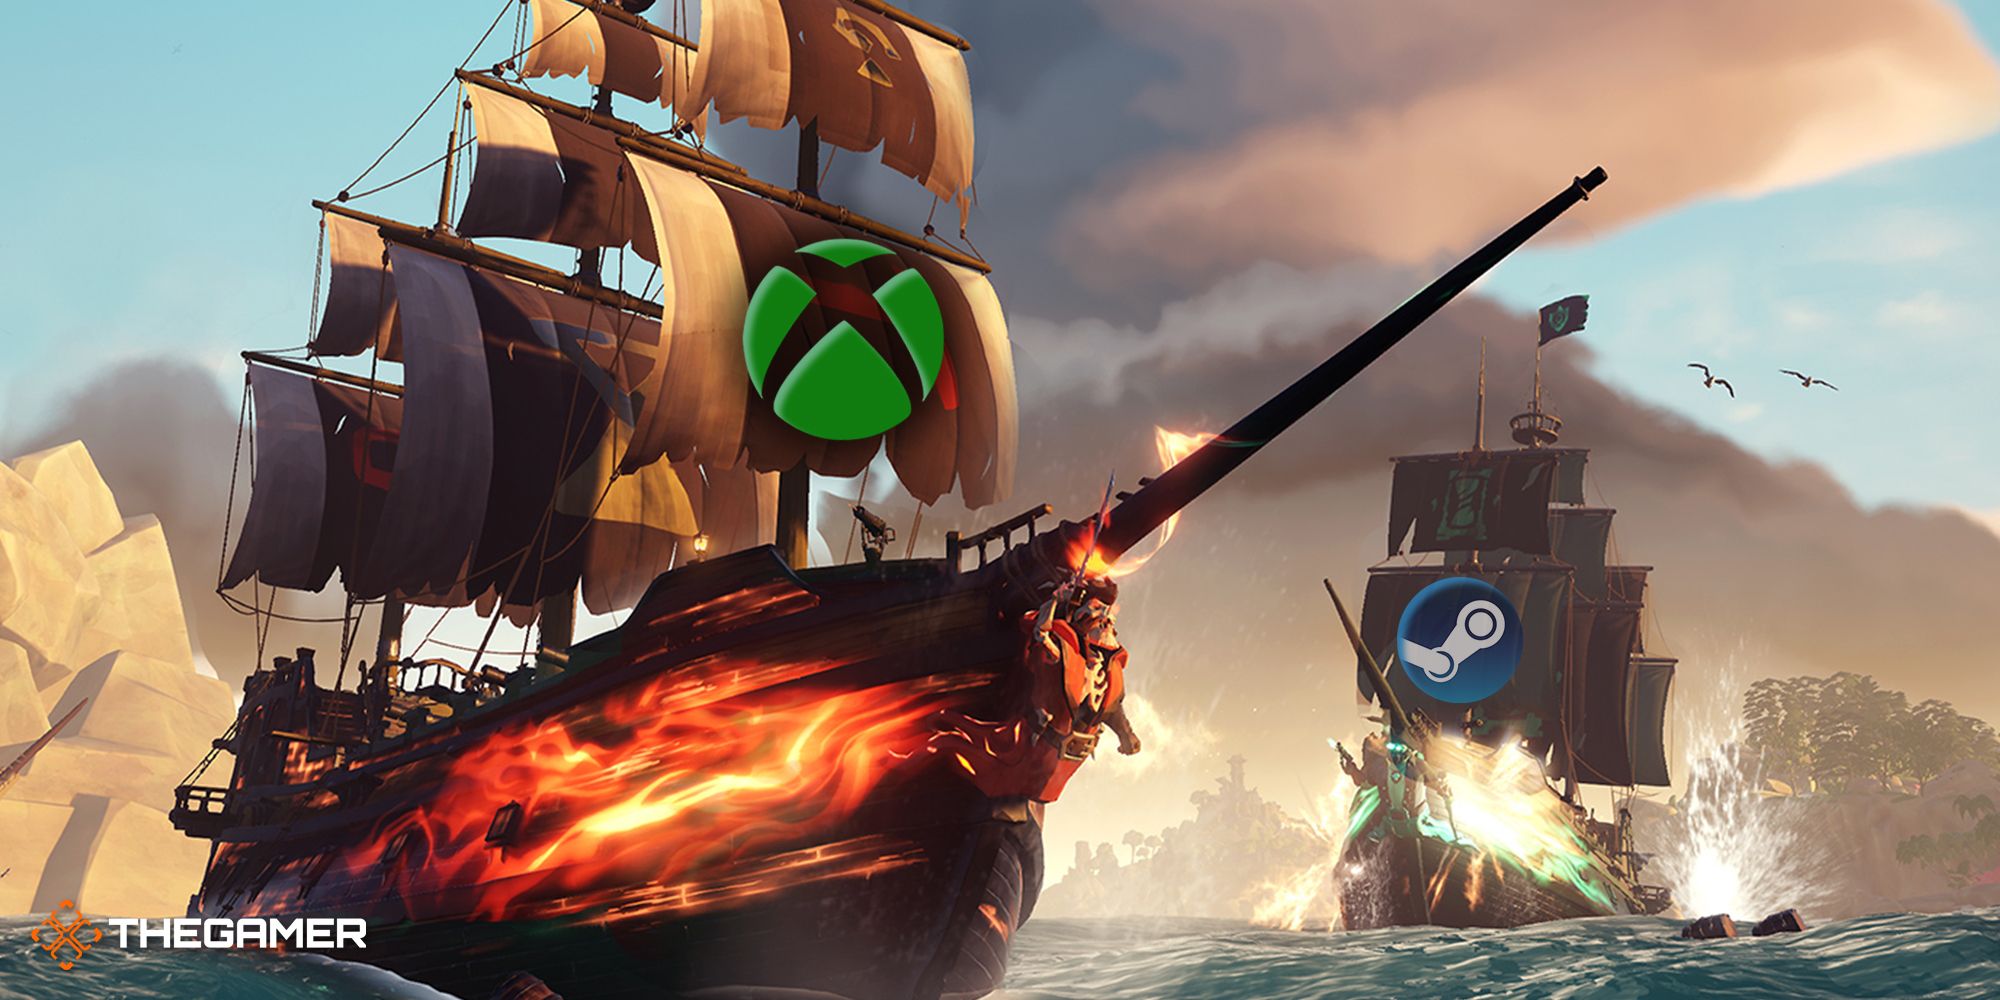 5-Sea Of Thieves How To Crossplay Co-Op Between PC and Xbox